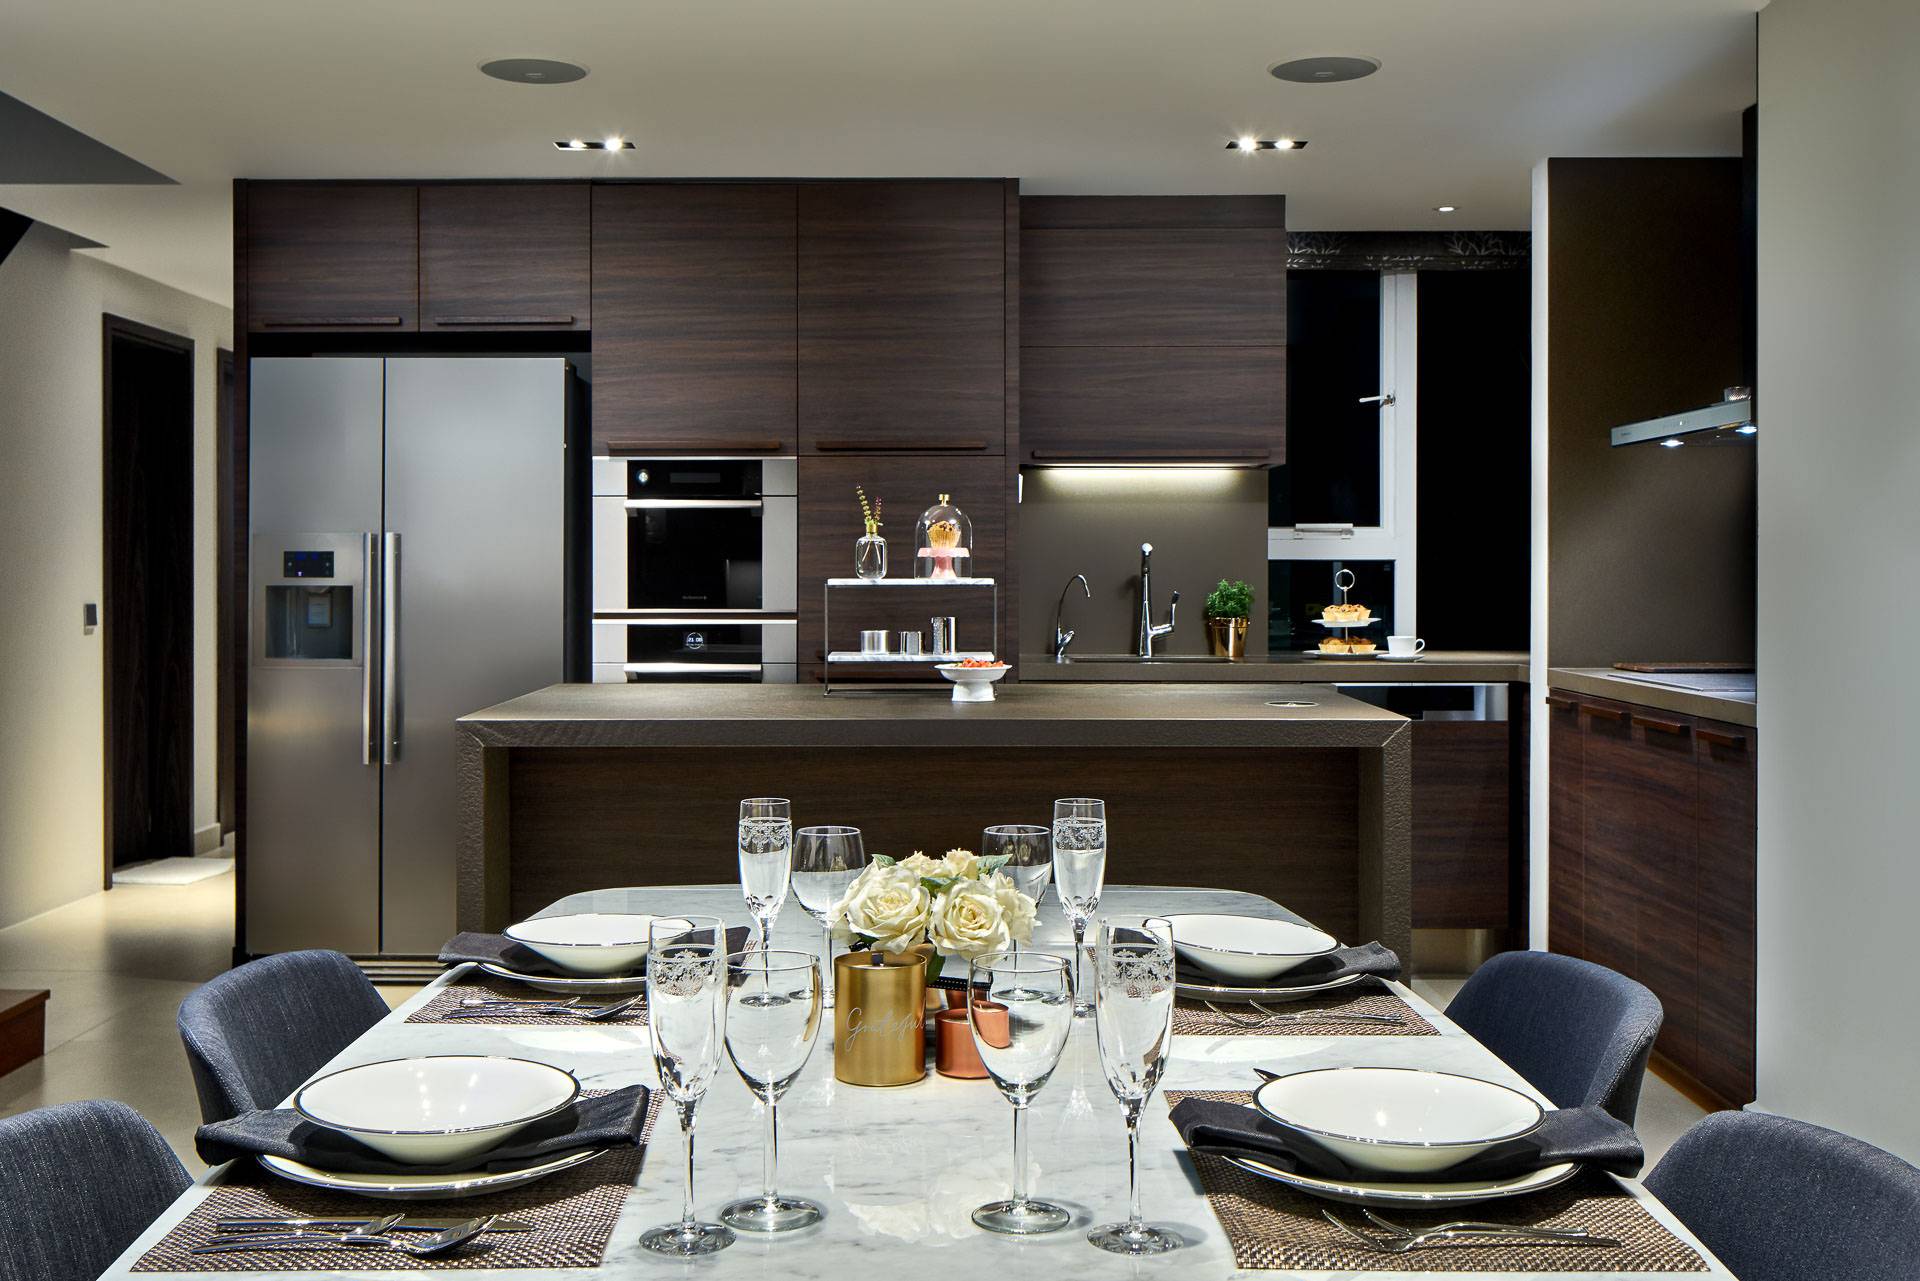 Interior design photography of kitchen table with glasses and plates at simei rise condominium in singapore